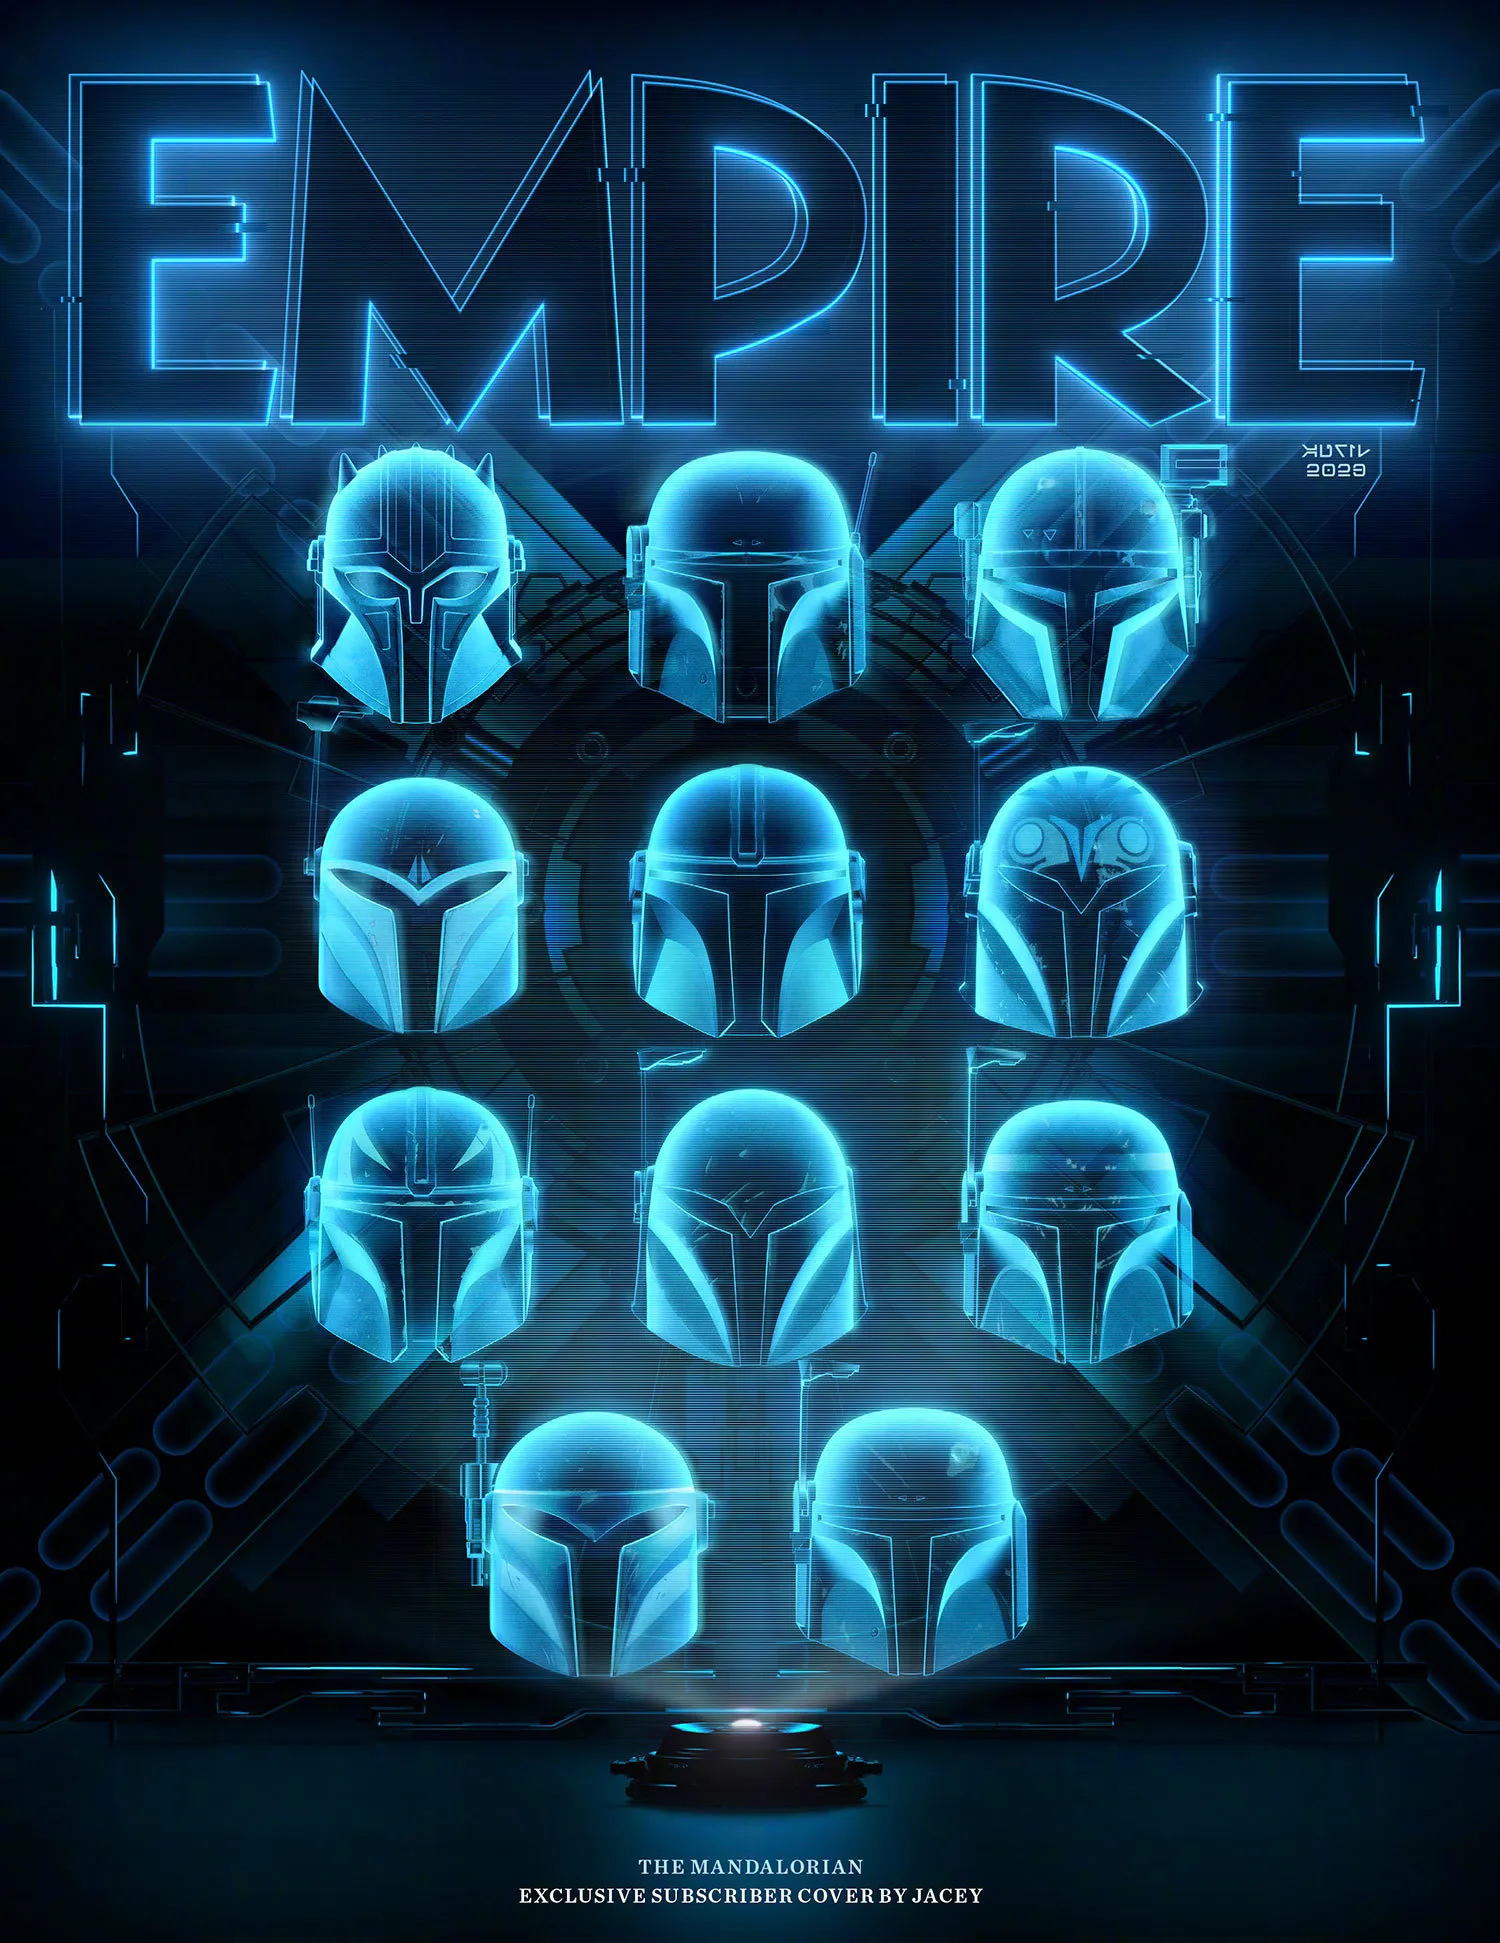 'The Mandalorian' on the cover of 'Empire' magazine | FMV6